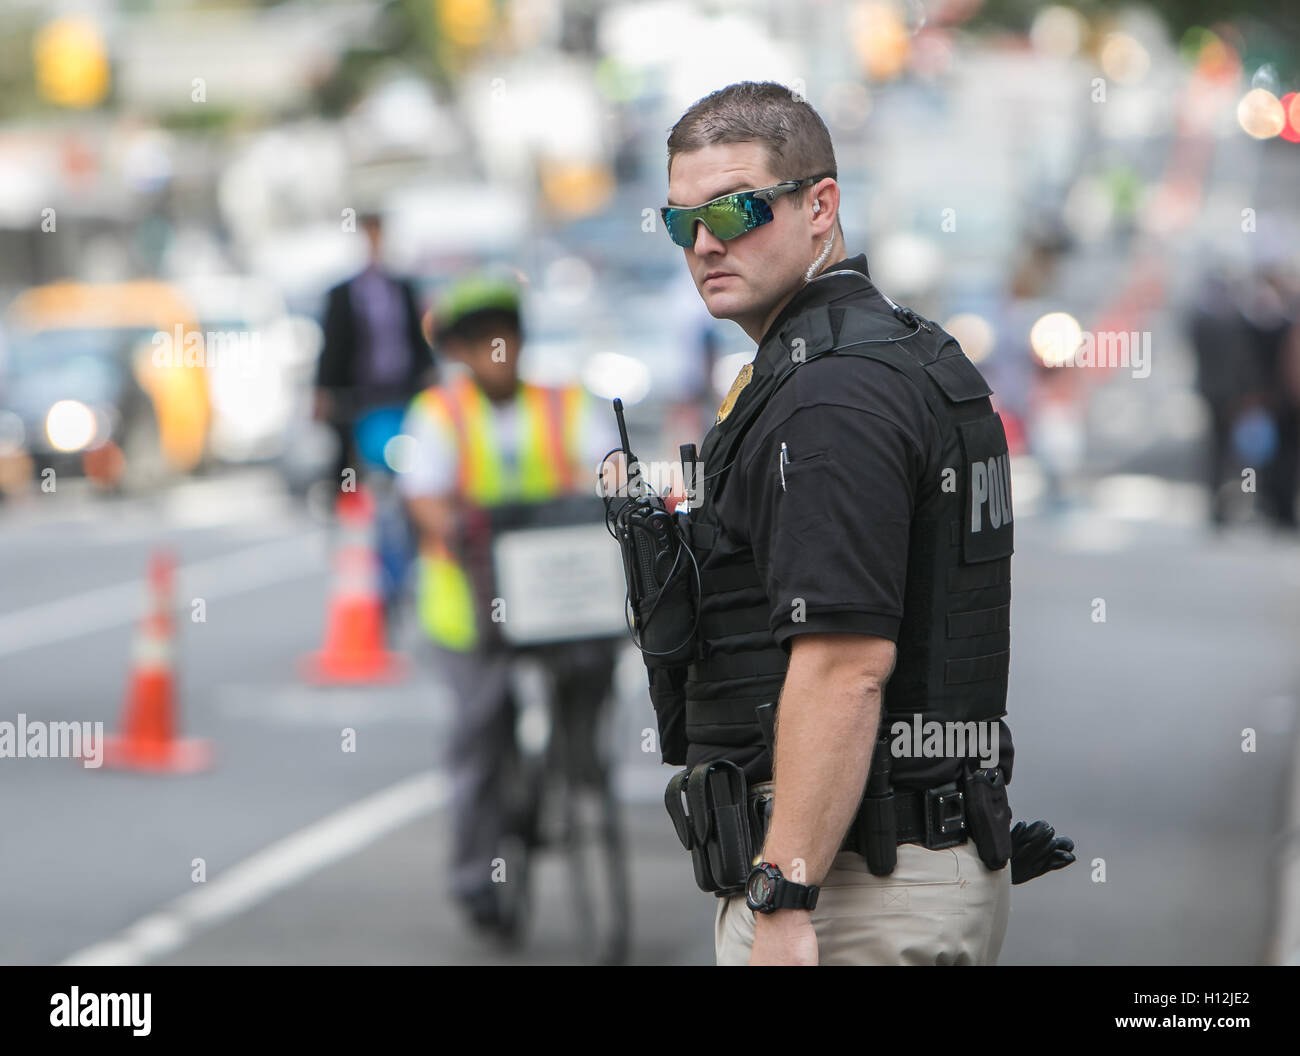 A Secret Service agent is helping direct traffic and keep the reserved lane clear during a UN General Assembly. Stock Photo